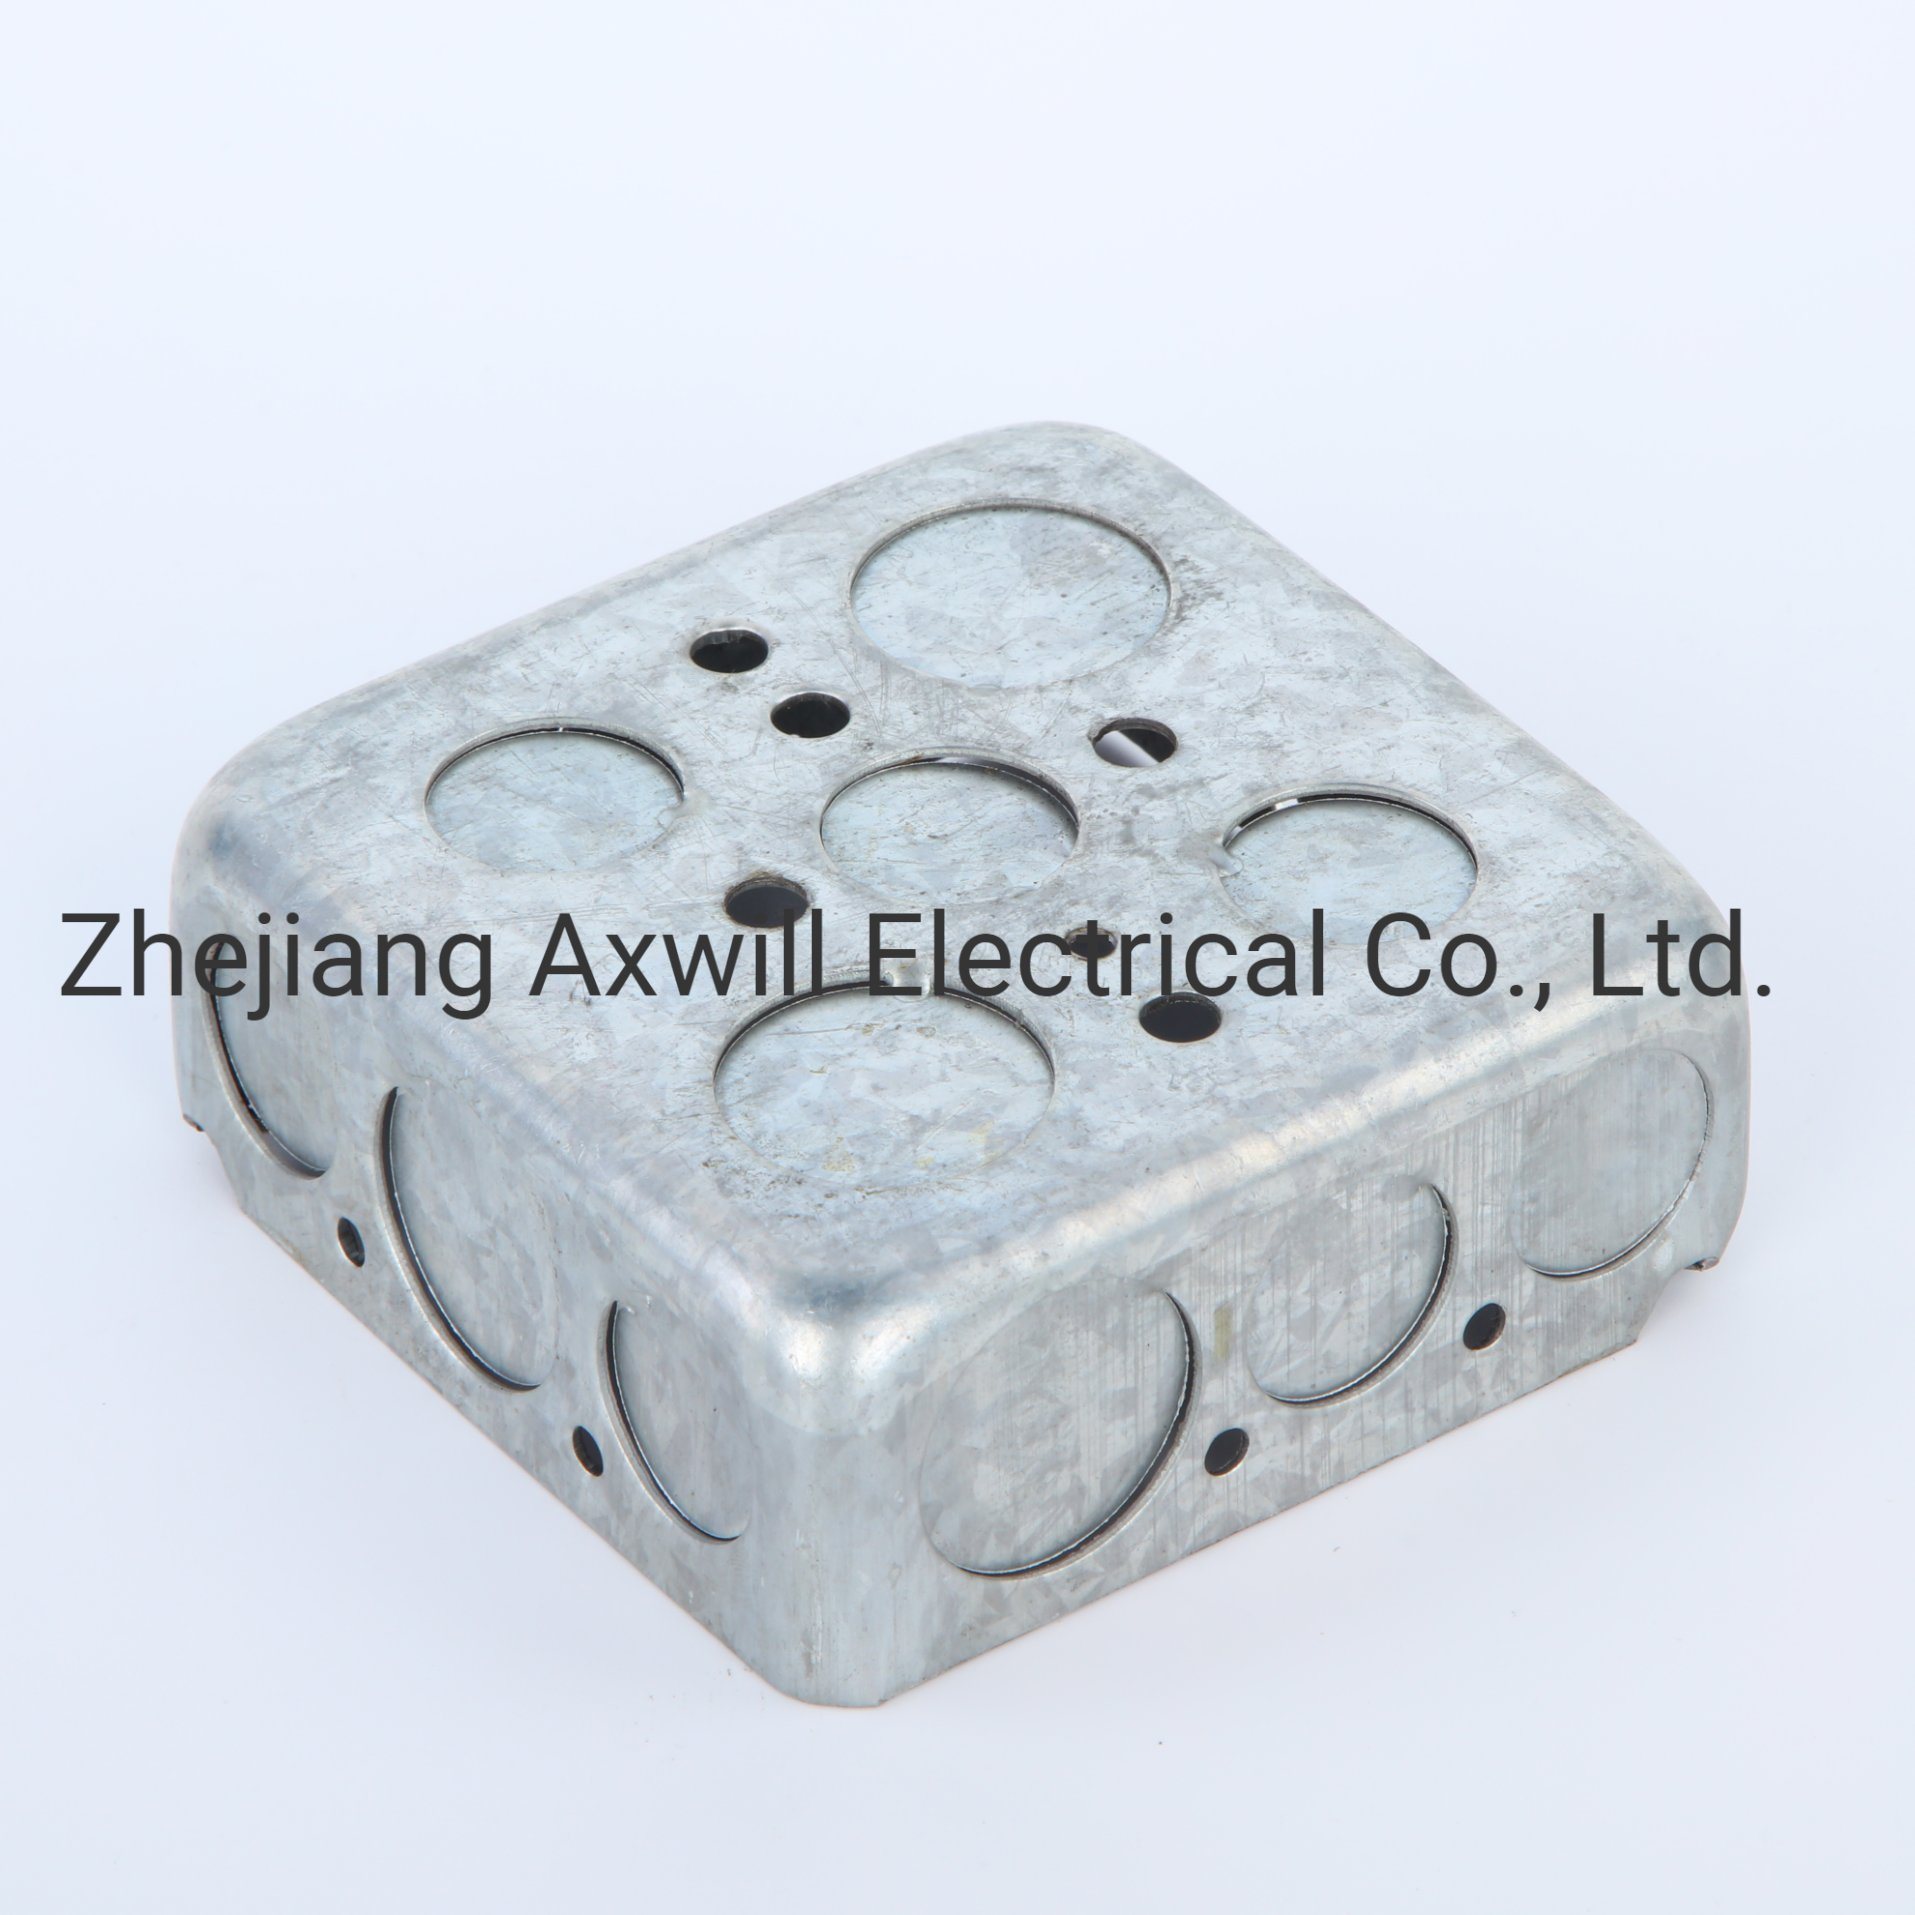 1.60mm UL Listed Square Outlet Box